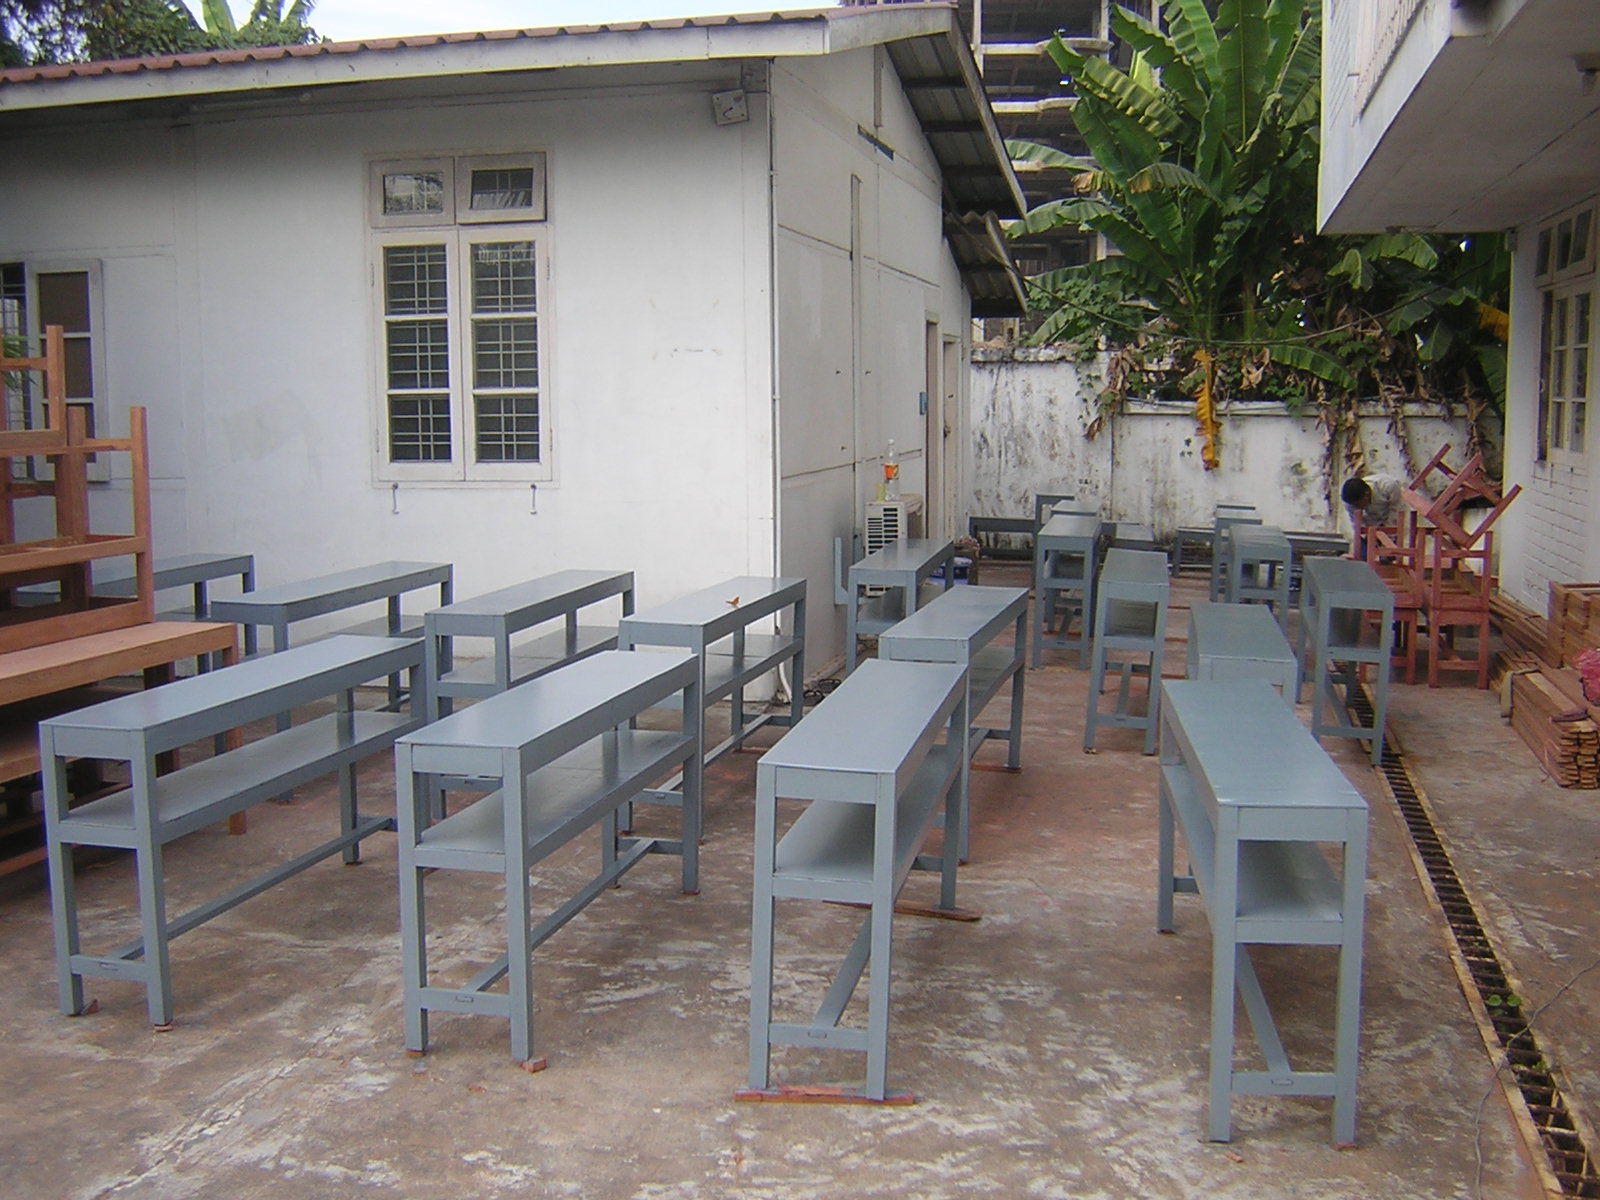 [benches+painted.JPG]